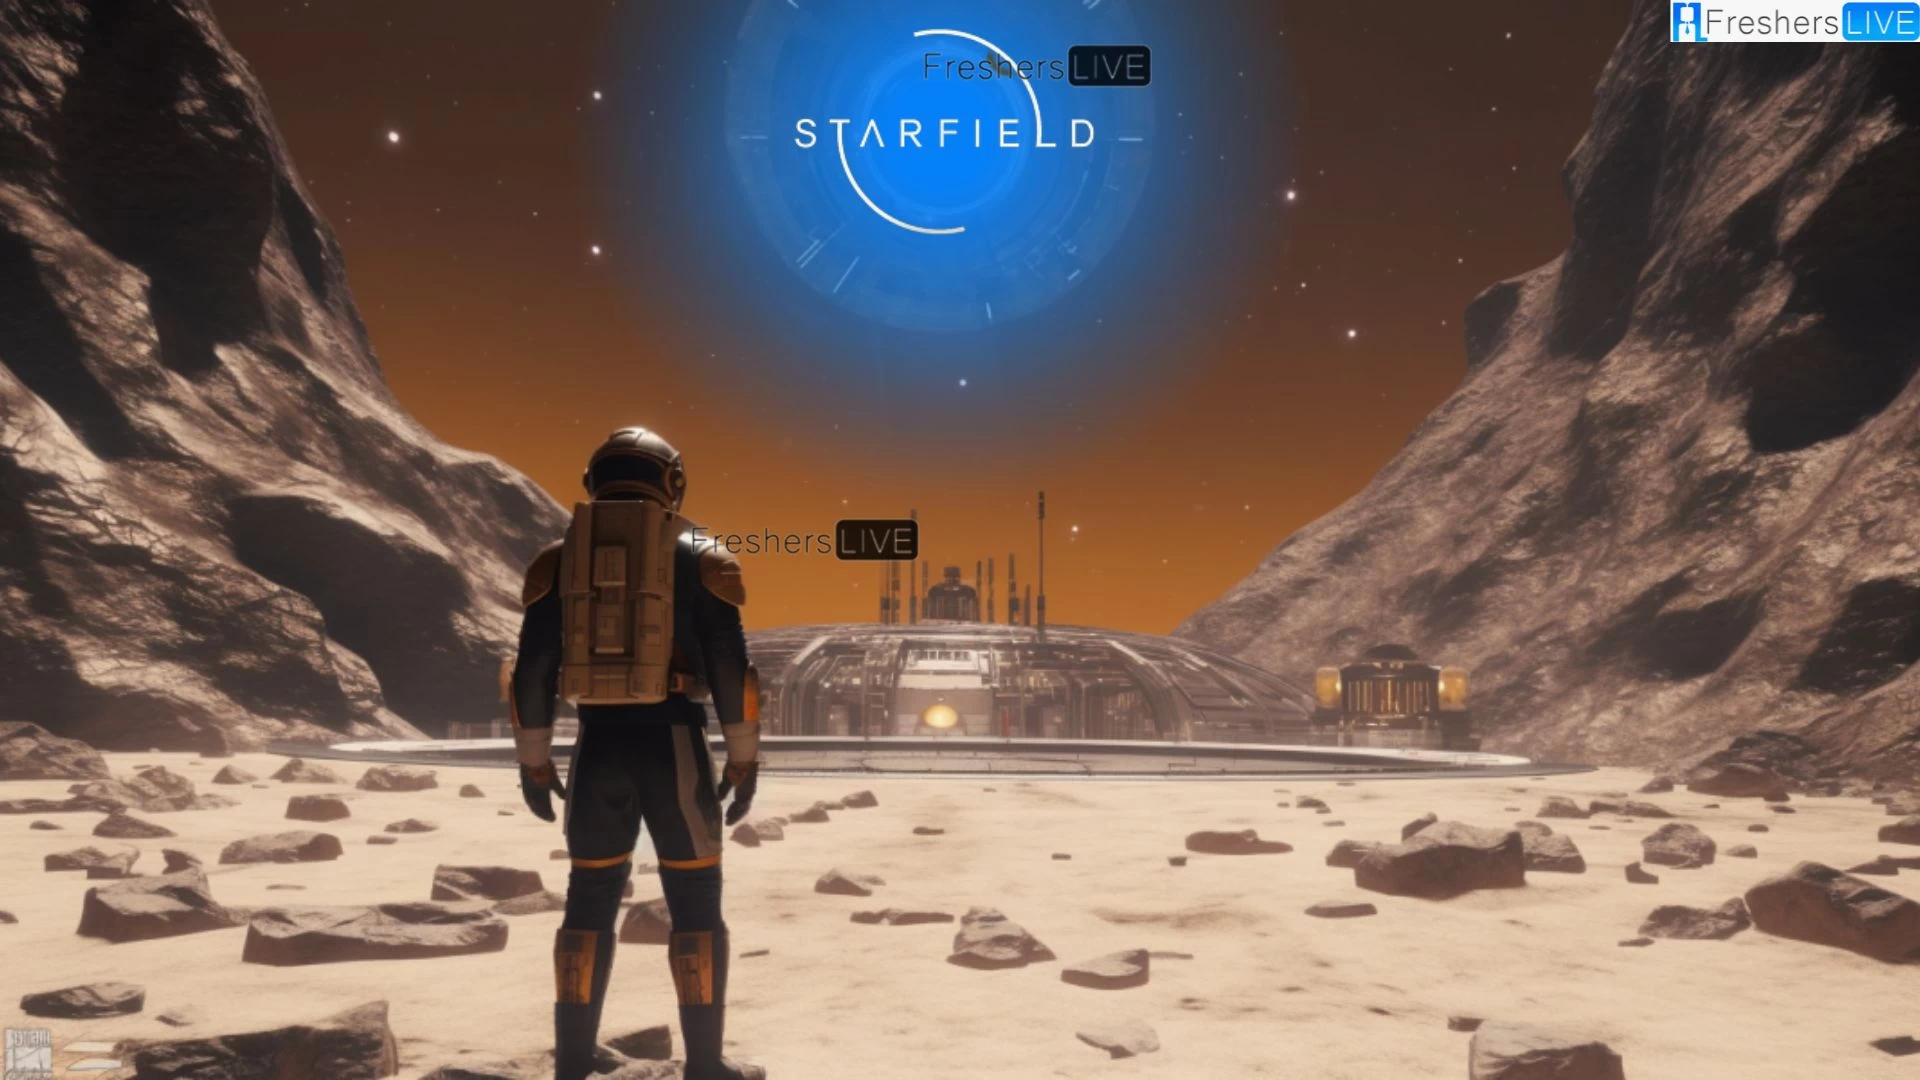 Starfield Update 1.7.33 Patch Notes: What's New in the Latest Update?